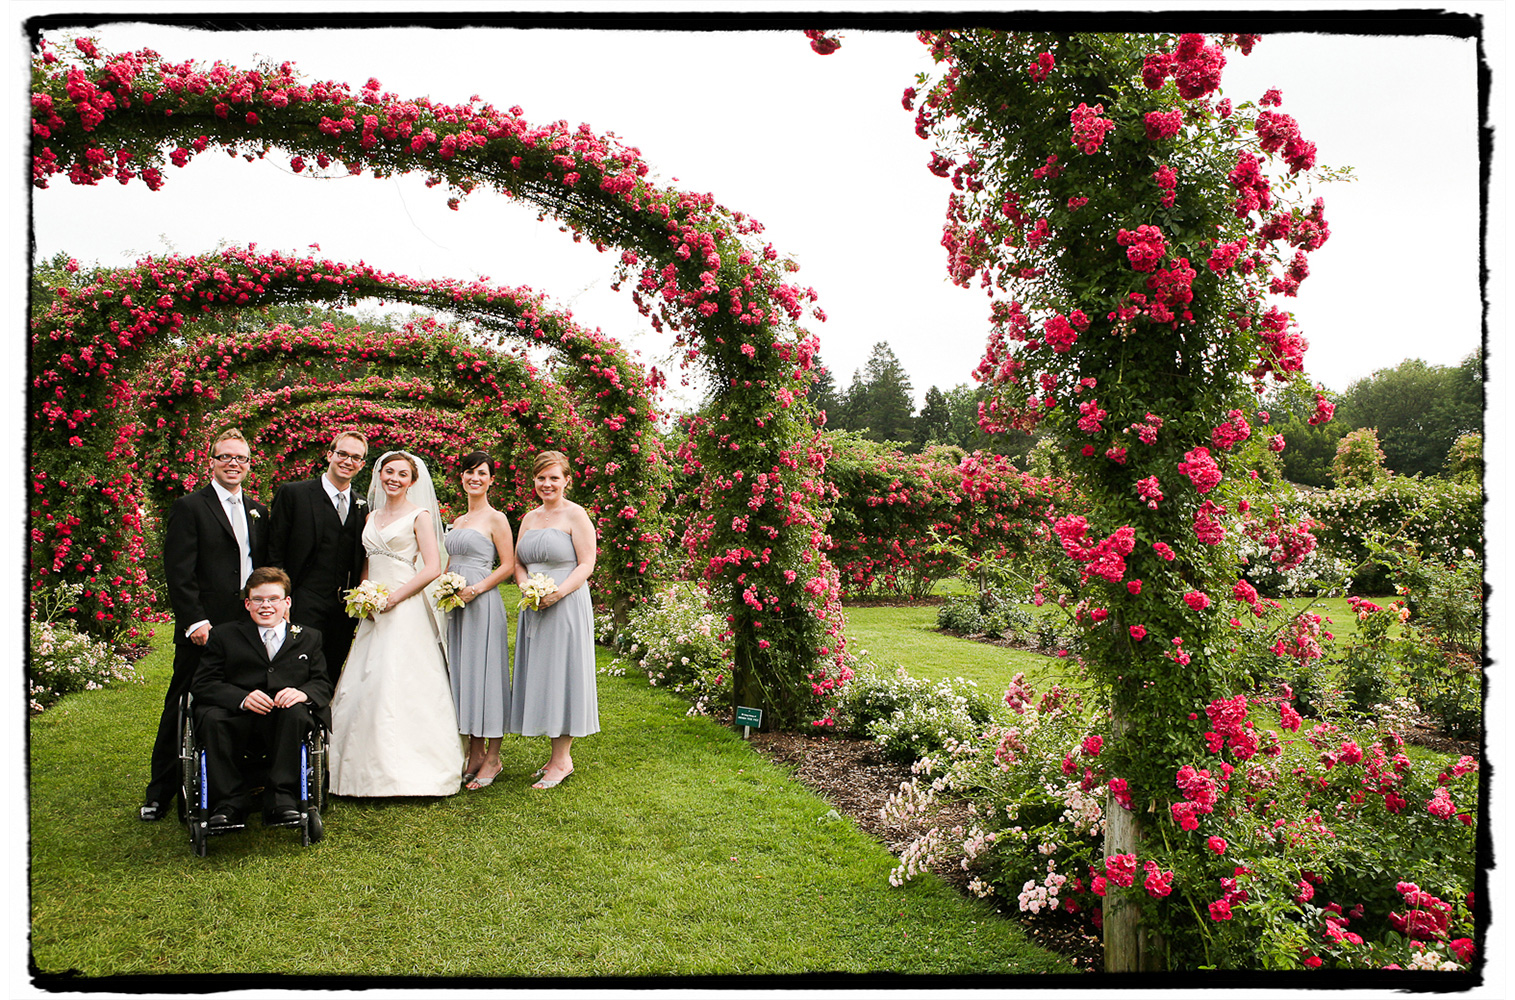 The Hartford Botanical Garden provided the perfect scenery for this beautiful wedding party portrait.